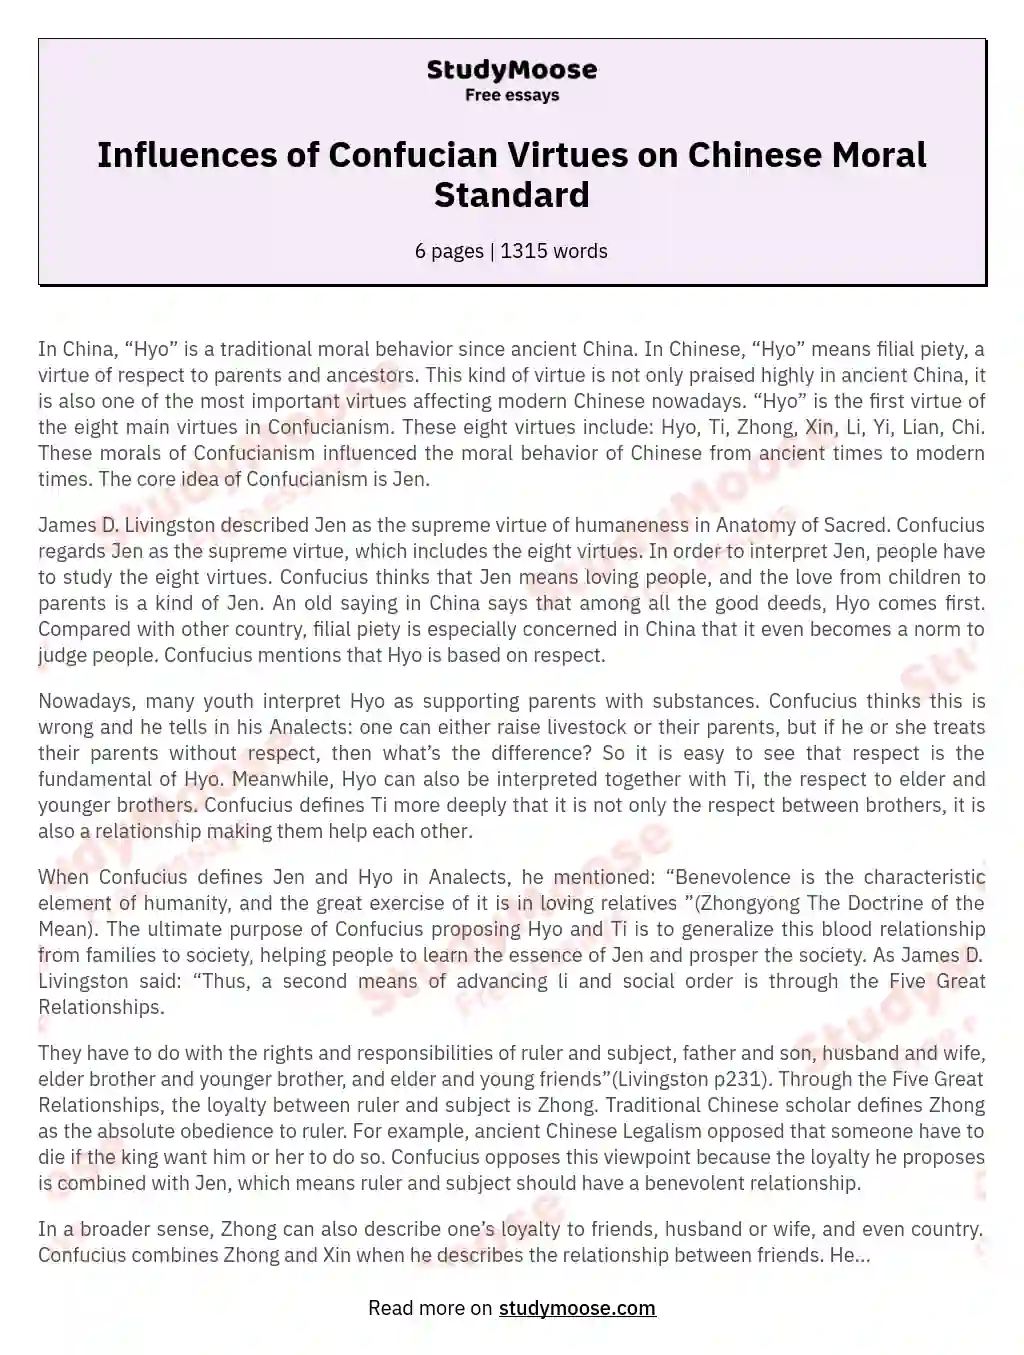 Influences of Confucian Virtues on Chinese Moral Standard essay